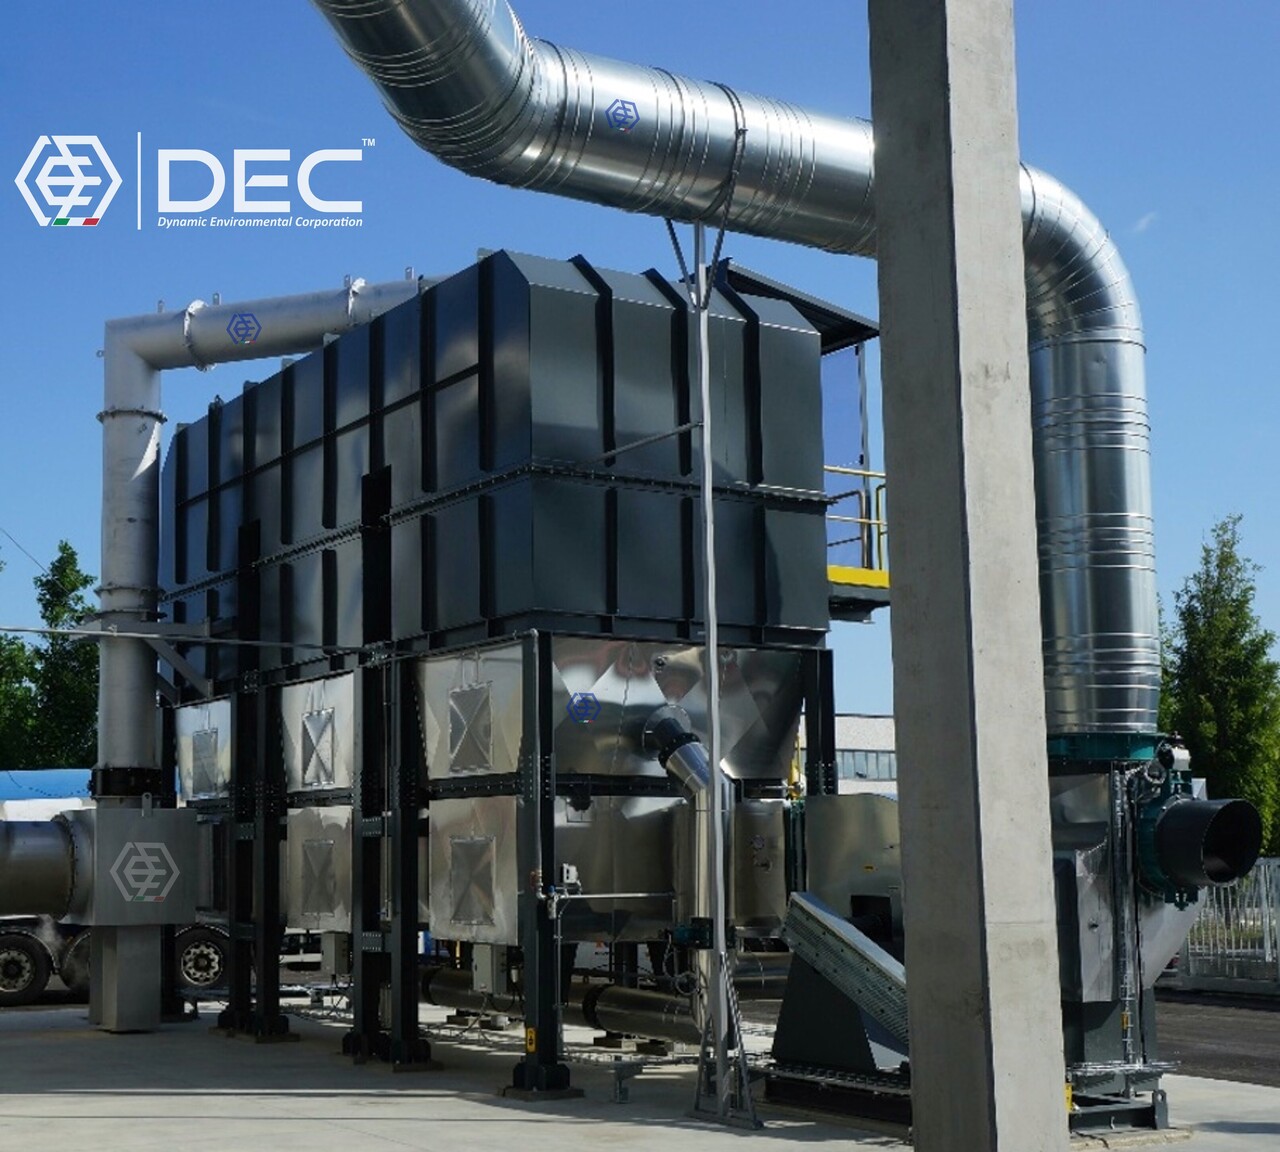 DEC, DEC IMPIANTI, Thermal oxidizer, Thermal incinerator, Oxidation equipment, Regenerative thermal oxidizer (RTO), Catalytic oxidizer, Recuperative thermal oxidizer, GHG, NOx, Direct-fired thermal oxidizer, Afterburner, Air pollution control, Industrial exhaust treatment, Volatile organic compounds (VOCs), Hazardous air pollutants (HAPs), Emission control system, Pollution abatement, Combustion chamber, Destruction efficiency, Heat recovery, Exhaust gas treatment, Industrial emissions control, Energy efficiency, Furnaces, RTO, RCO, XTO, TOX, VOC, HAP, used Thermal Oxidizer, Thermal Oxidation, Thermal Oxidizer Service, Thermal Oxidizer Repair, Thermal Oxidizer Maintenance, oxidiser, MACT, BACT, RACT, EPA, Title V Permit, Destruction Efficiency, 99% Destruction Efficiency, Combustion, Combustion Controls, environmental services